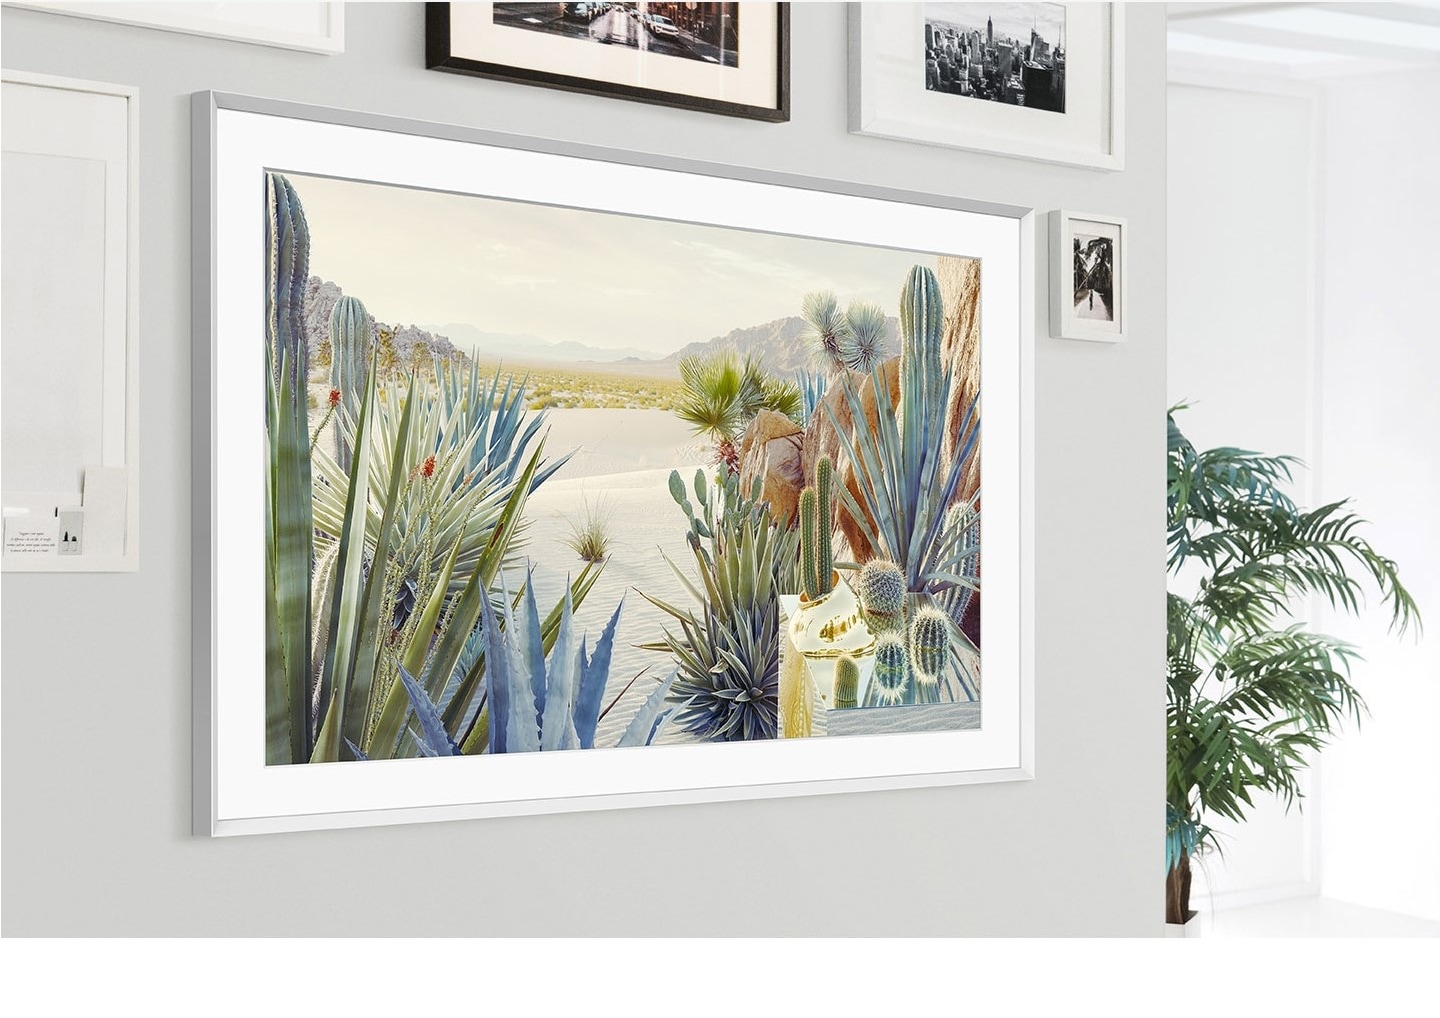 The Frame is mounted on the wall of a home interior and its modern frame design blends with the other picture frameson the wall.